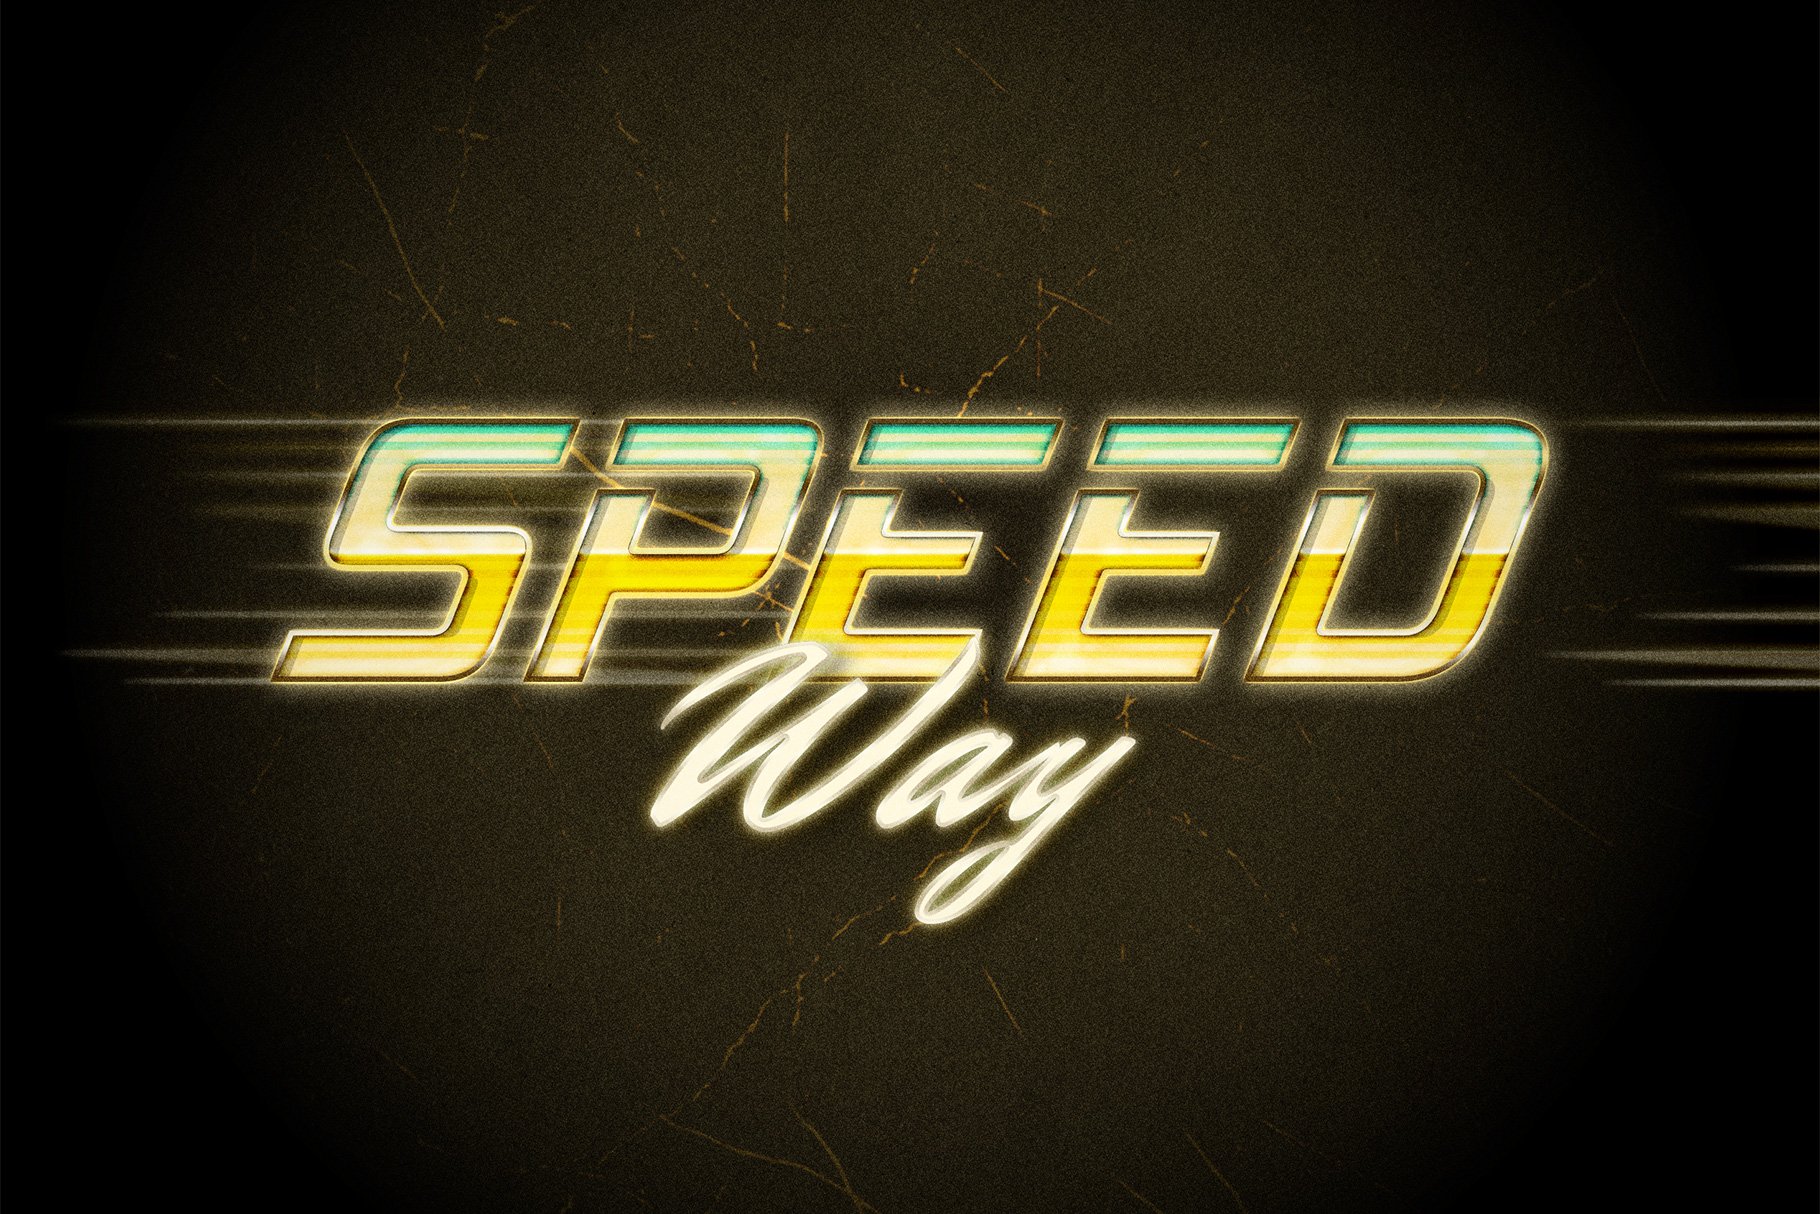 Back to the 80s Retro Text Effects by Pixelbuddha